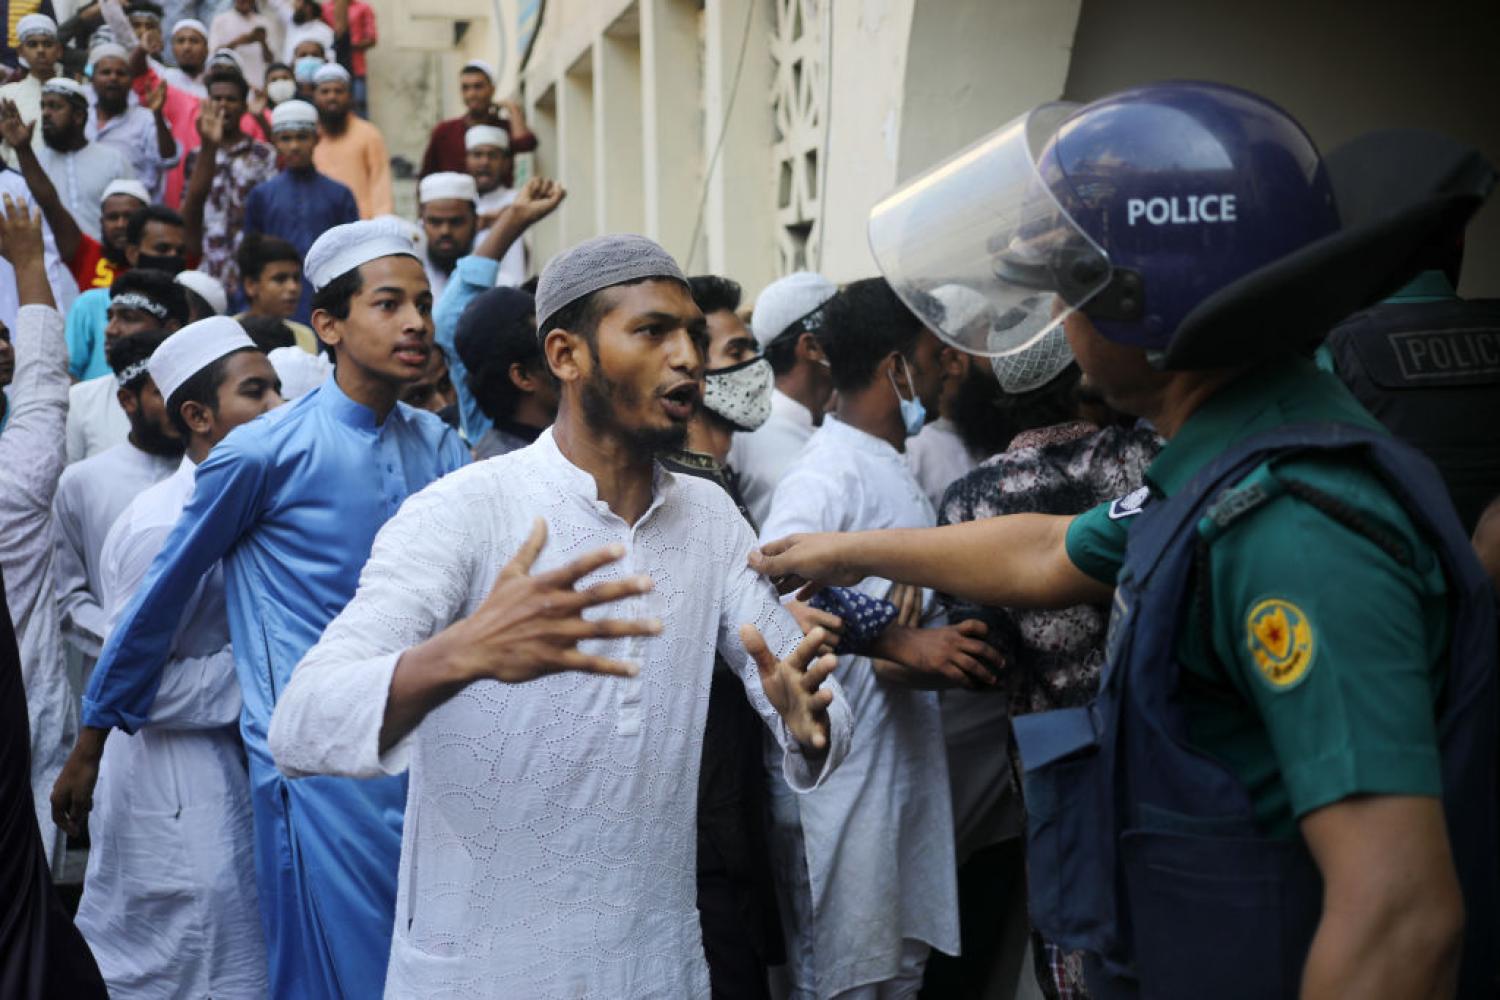 Police try to calm protesters during a demonstration after Friday prayers in Dhaka, Bangladesh on 15 October (Syed Mahamudur Rahman/NurPhoto via Getty Images)